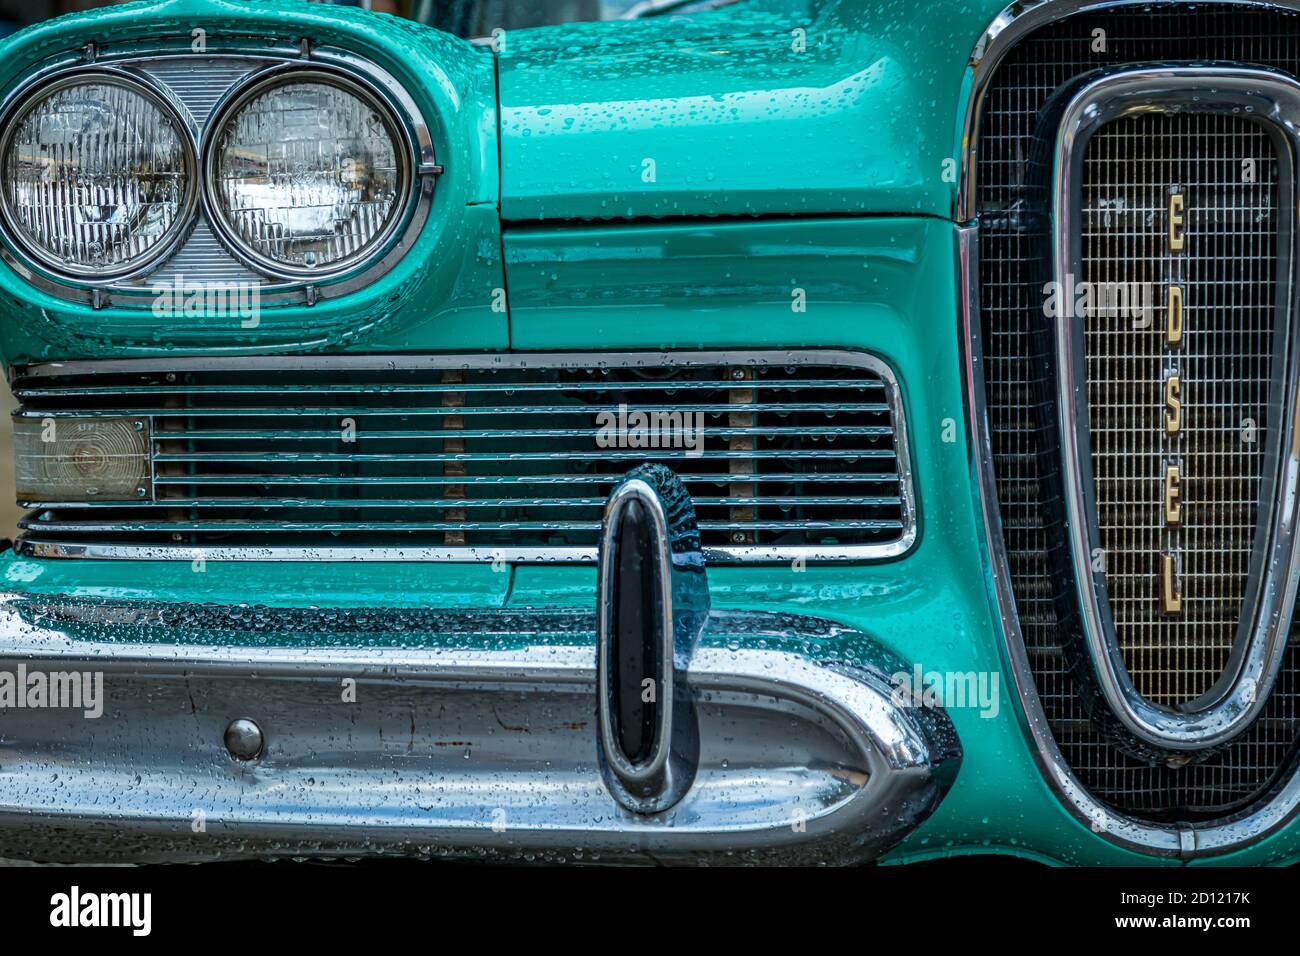 New Smyrna Beach, FL - August 12, 2017: 1958 Ford Edsel Pacer at the Canal Street Car Show. Stock Photo